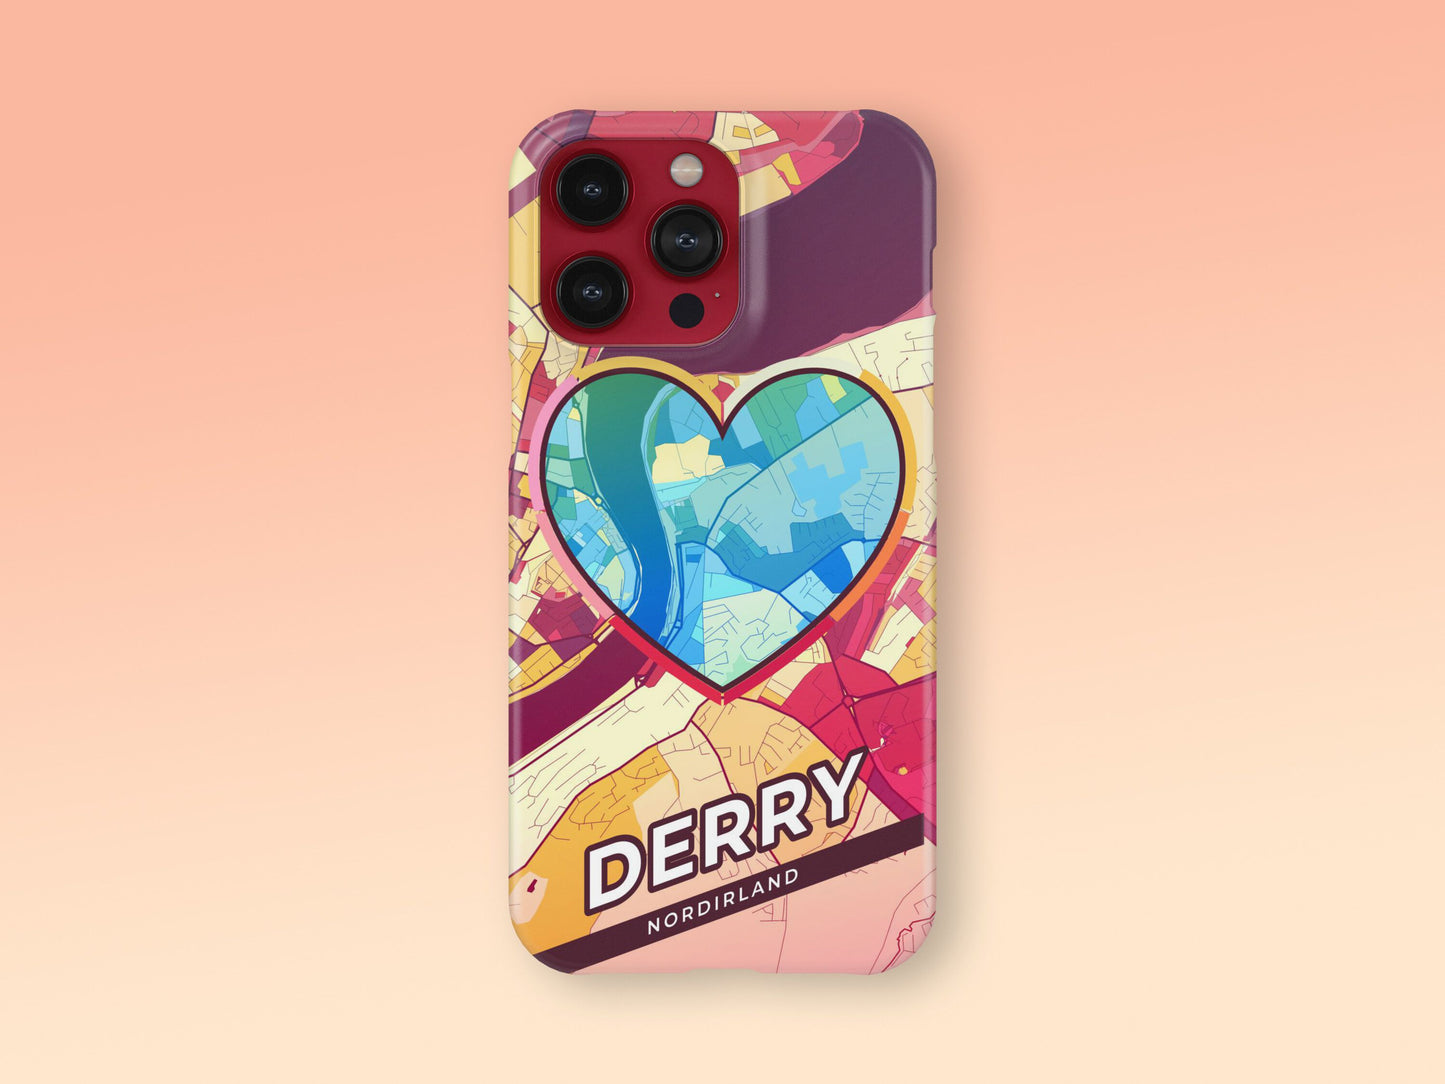 Derry Northern Ireland slim phone case with colorful icon. Birthday, wedding or housewarming gift. Couple match cases. 2